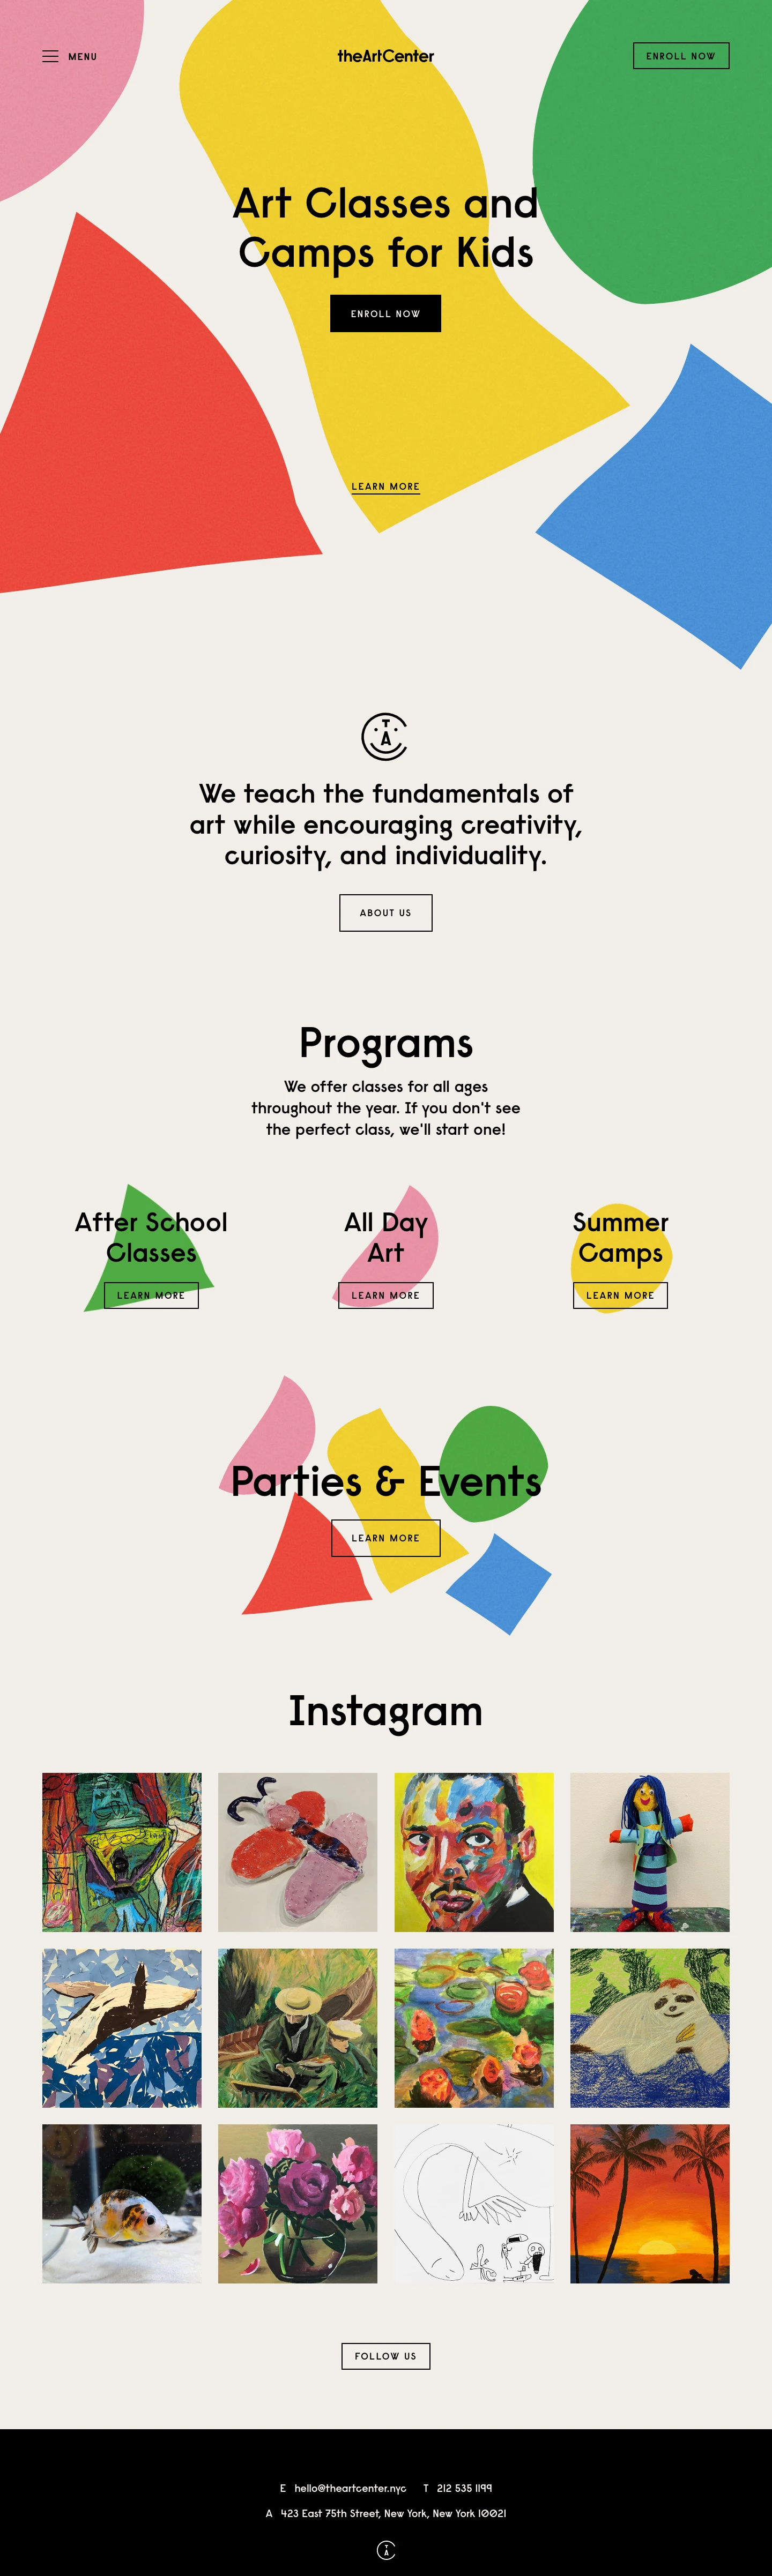 The Art Center Landing Page Example: We teach the fundamentals of art while encouraging creativity, curiosity, and individuality.